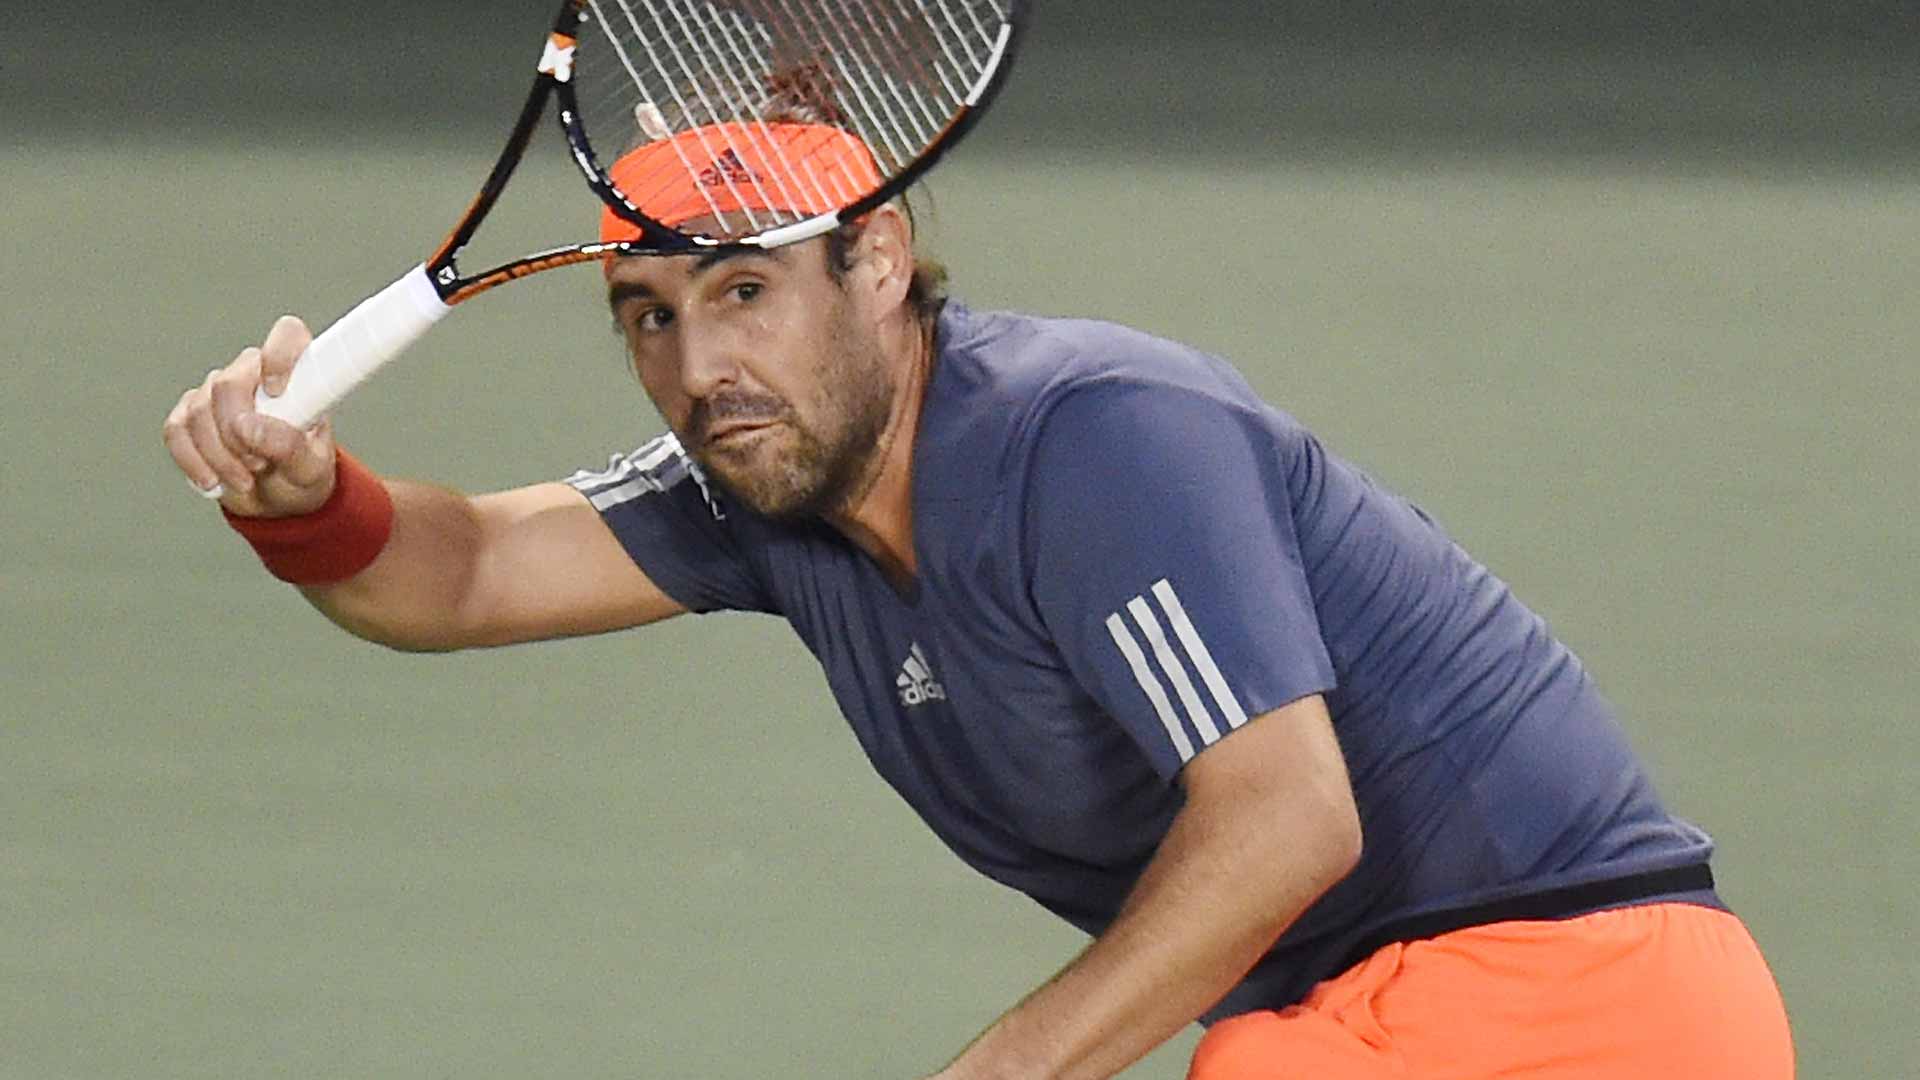 Baghdatis Upsets Tomic To Reach Stockholm QFs